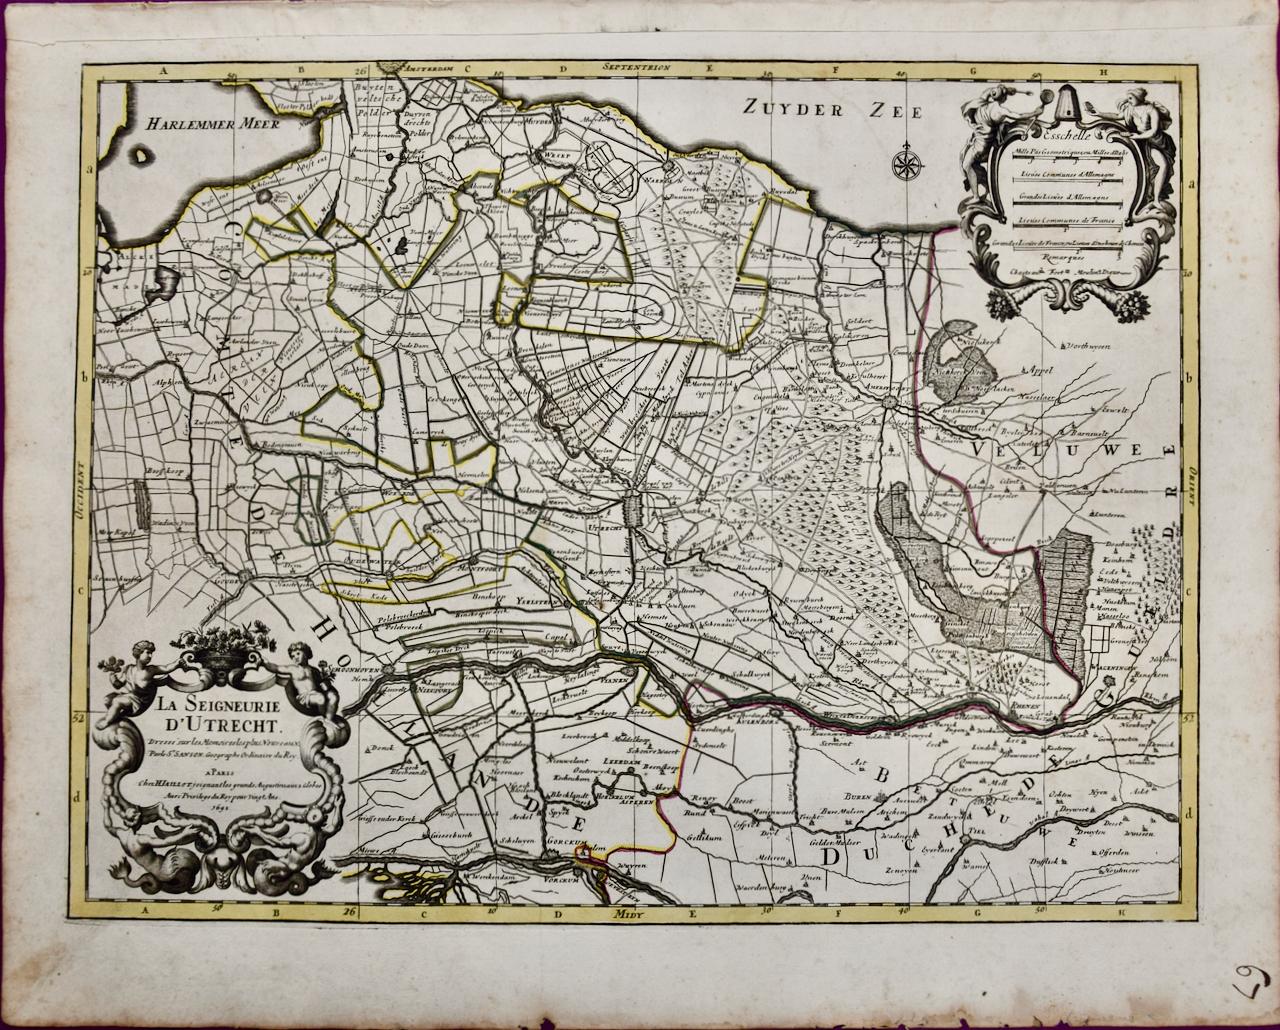 Utrecht, Netherlands: A Large 17th Century Hand-colored Map by Sanson & Jaillot